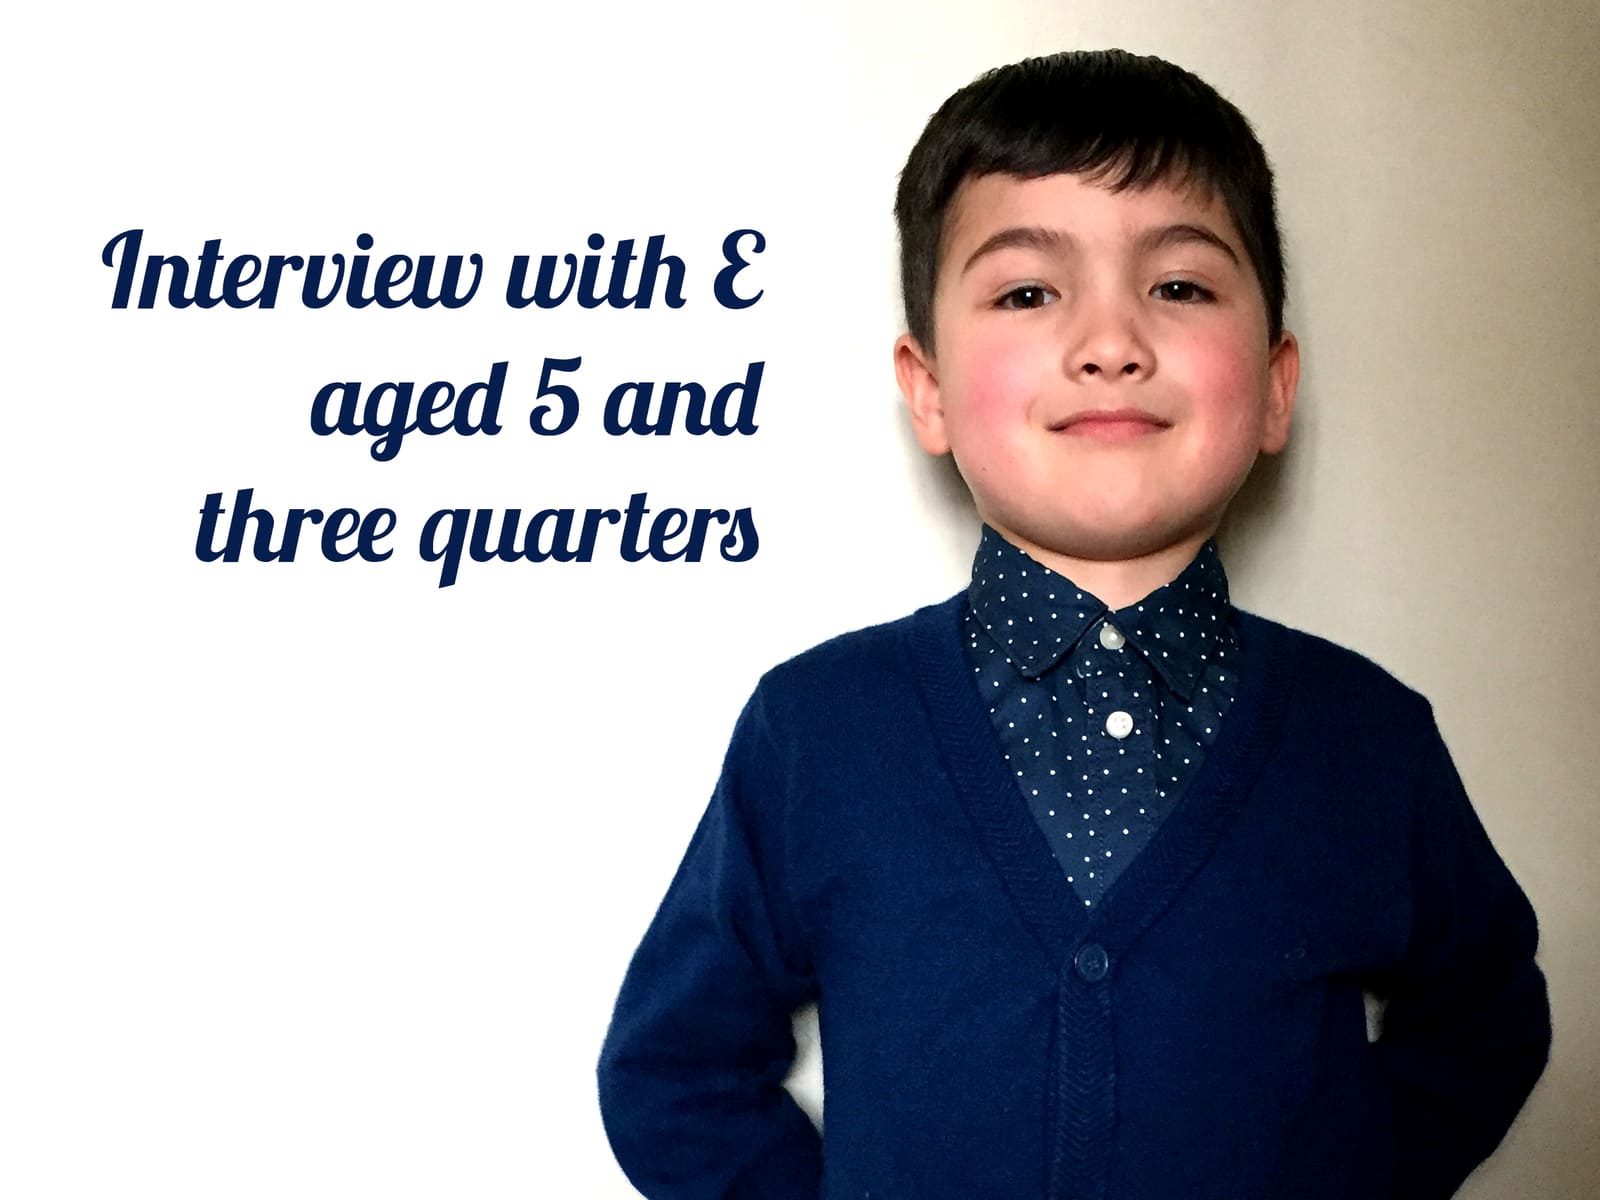 Interview with E aged 5 and three quarters